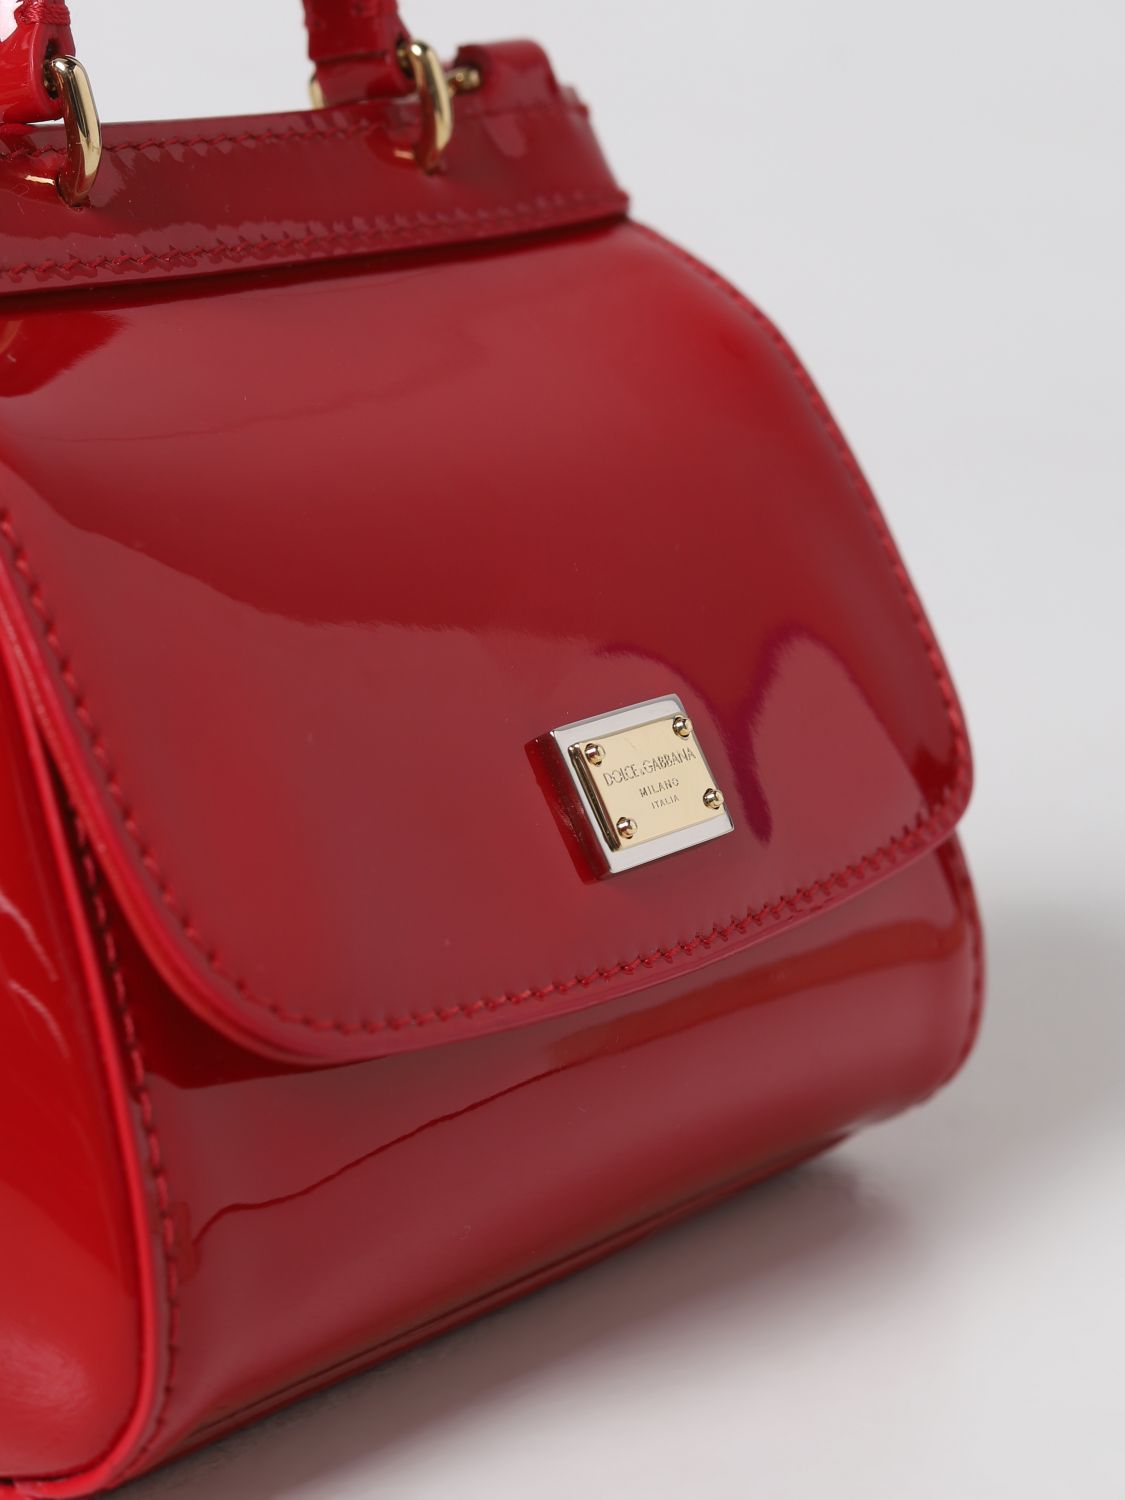 DOLCE & GABBANA: Sicily bag in patent leather - Red  Dolce & Gabbana  clutch EB0003A1067 online at